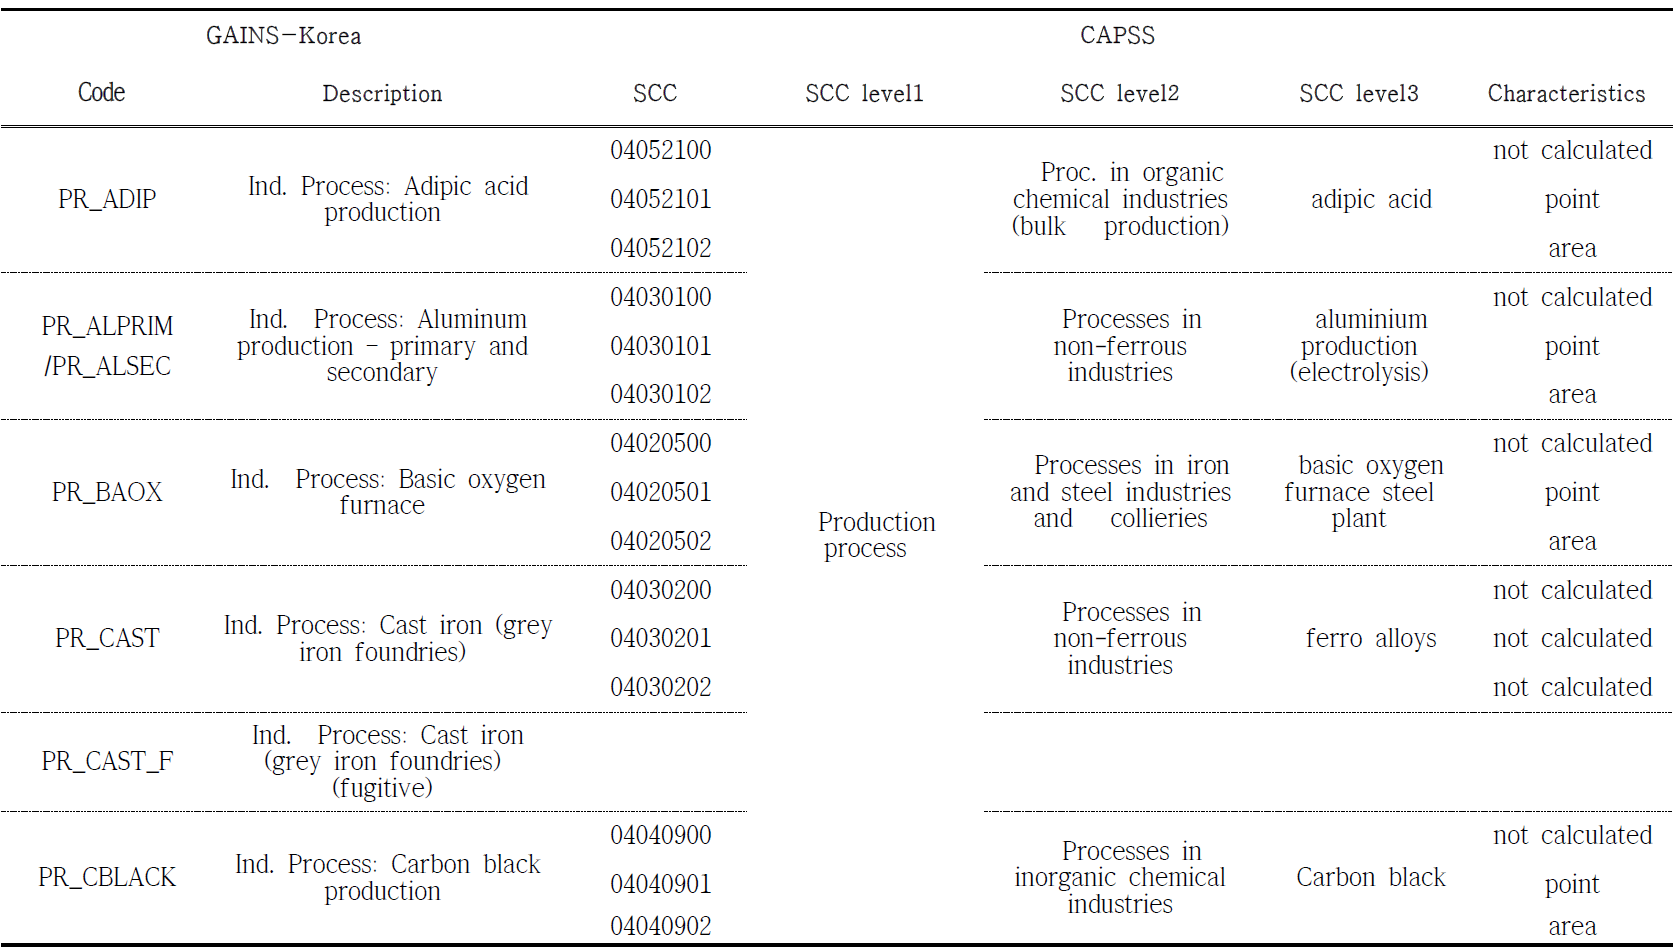 Example of mapping table of source and fuel classification between CAPSS and GAINS systems for Industry process sector